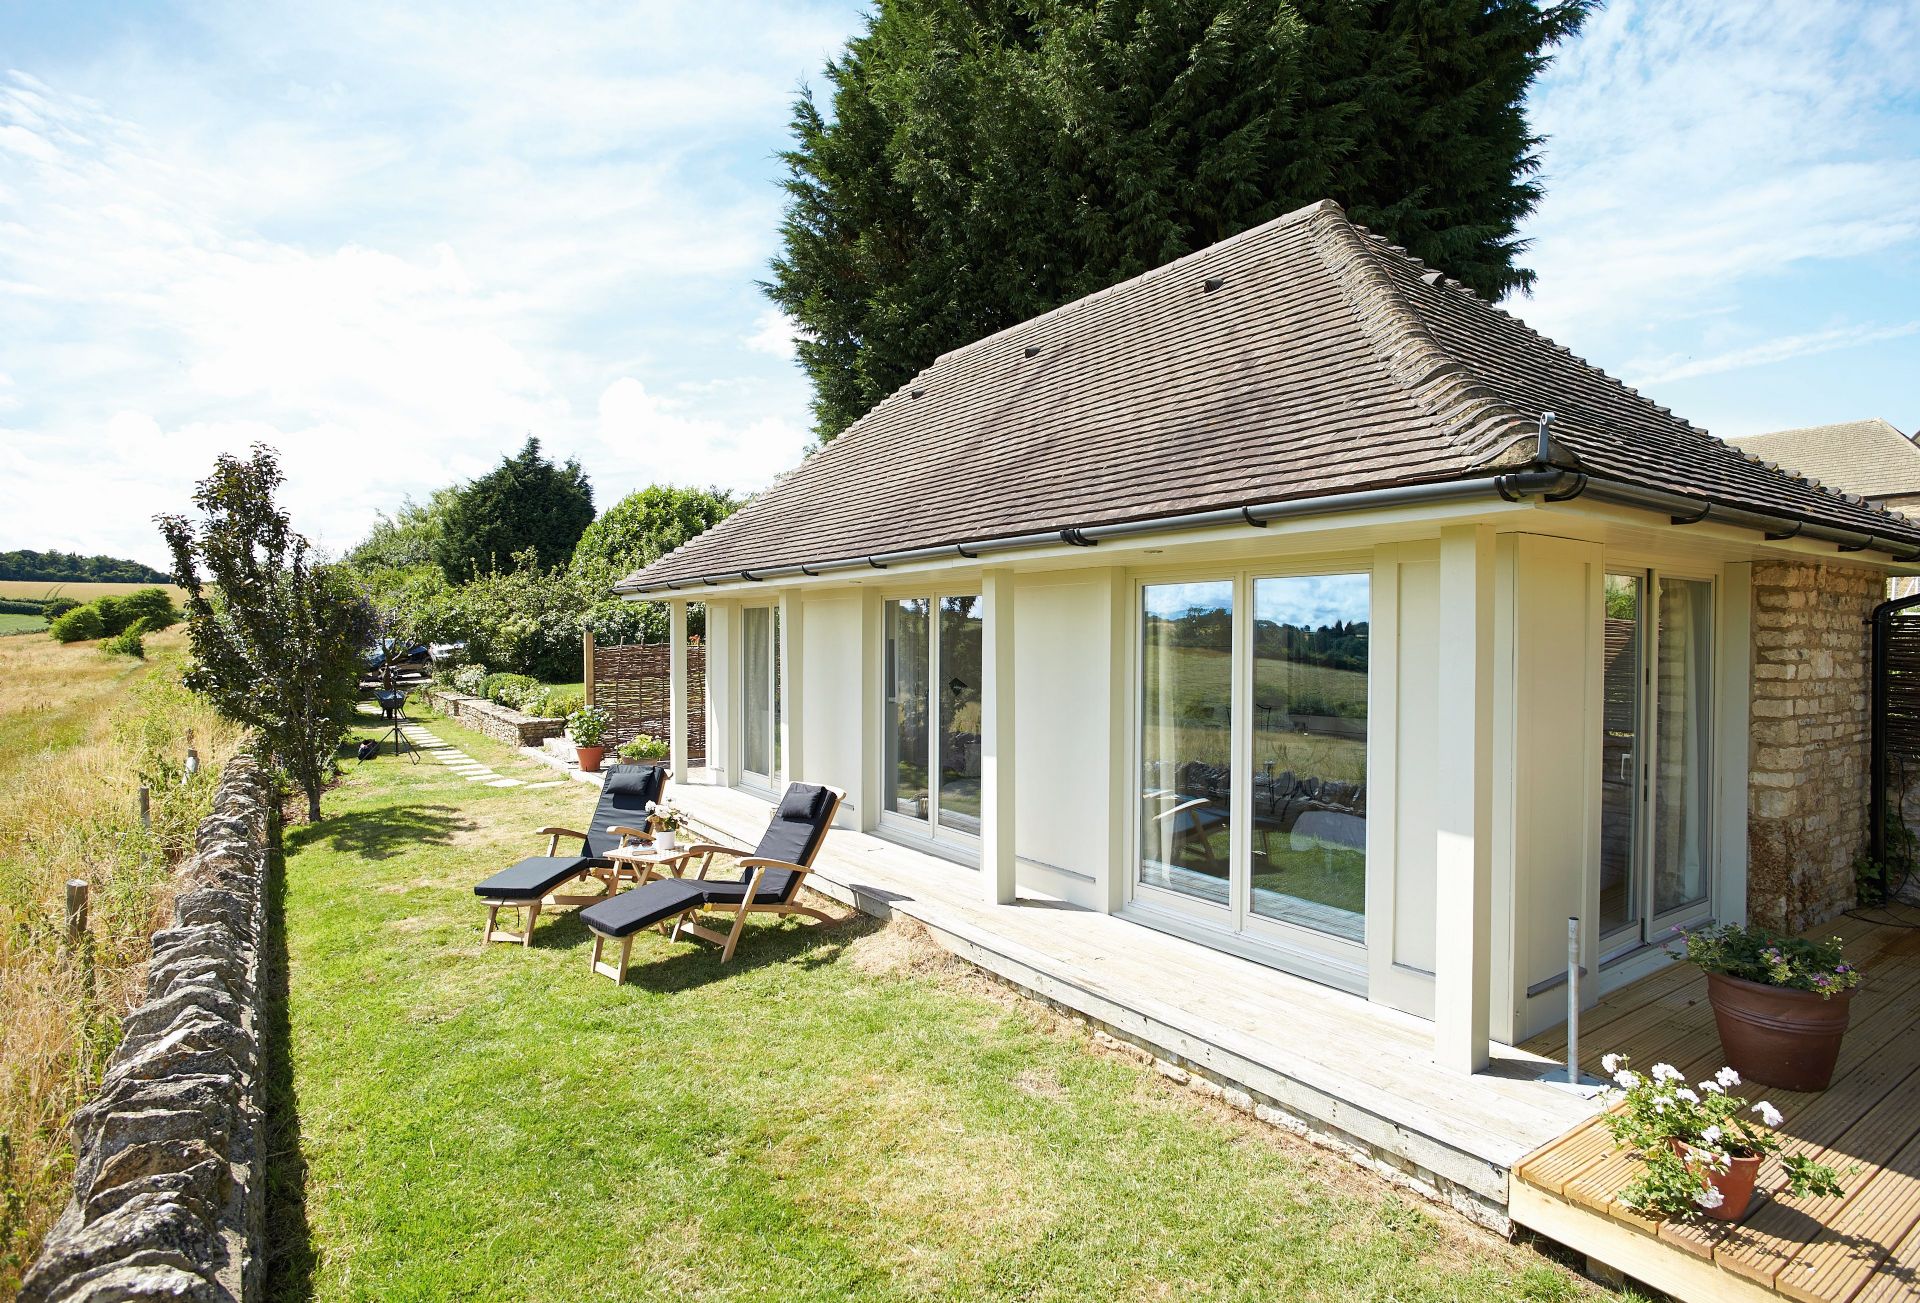 More information about The Pavilion - ideal for a family holiday